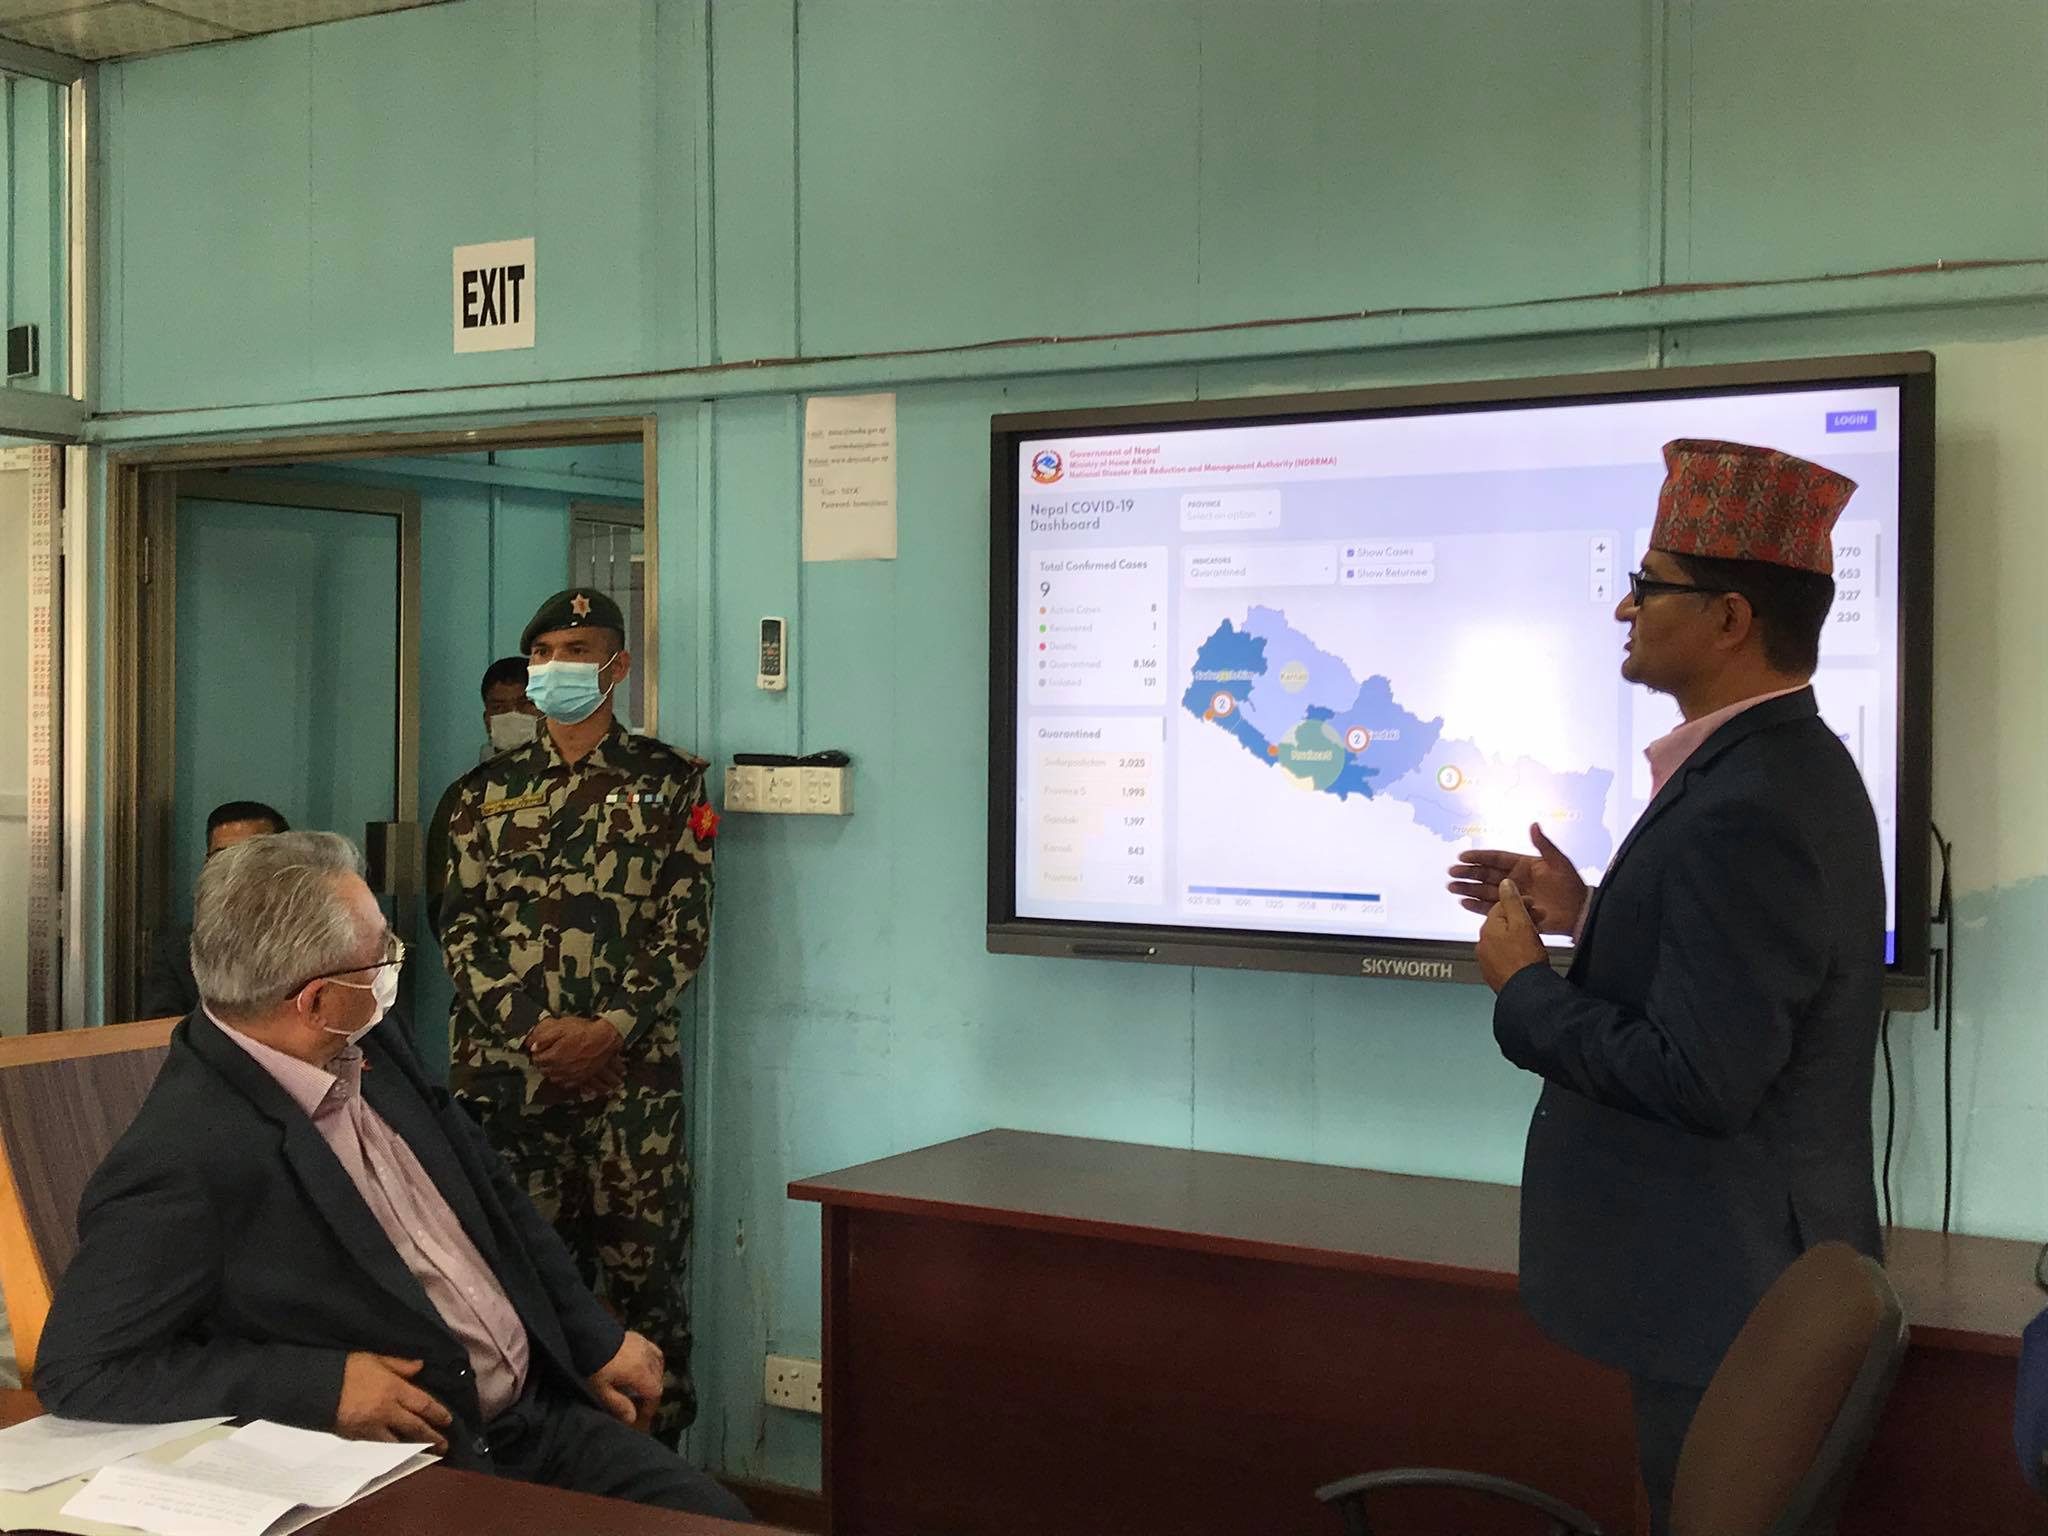 COVID-19 application being launched at the Ministry of Home Affairs, in Kathmandu, on Monday, April 6, 2020.